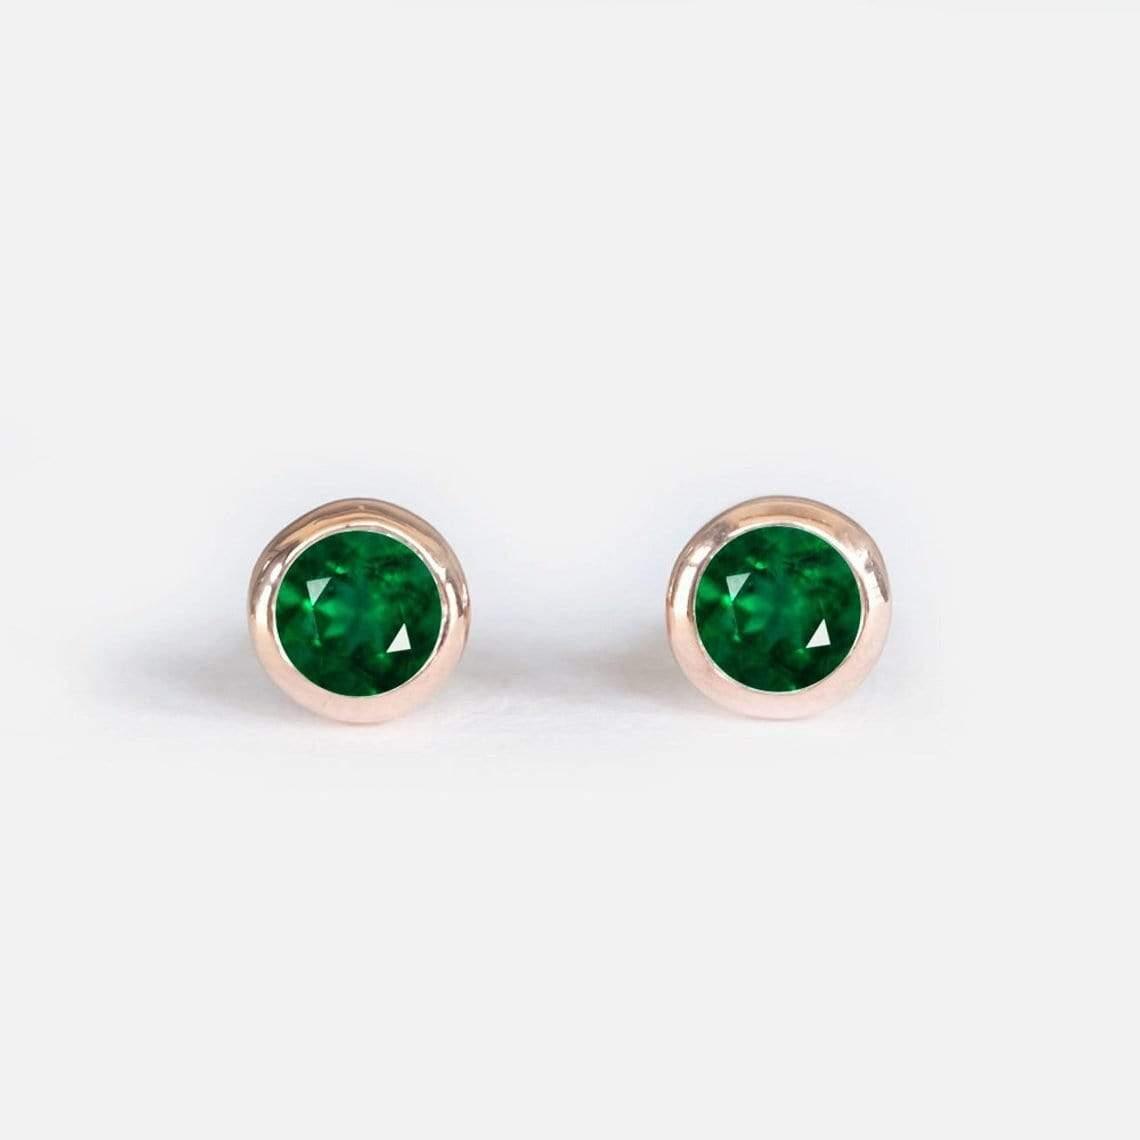 0.25 Carats 14k Solid Rose Gold Emerald Earrings - SOVATS